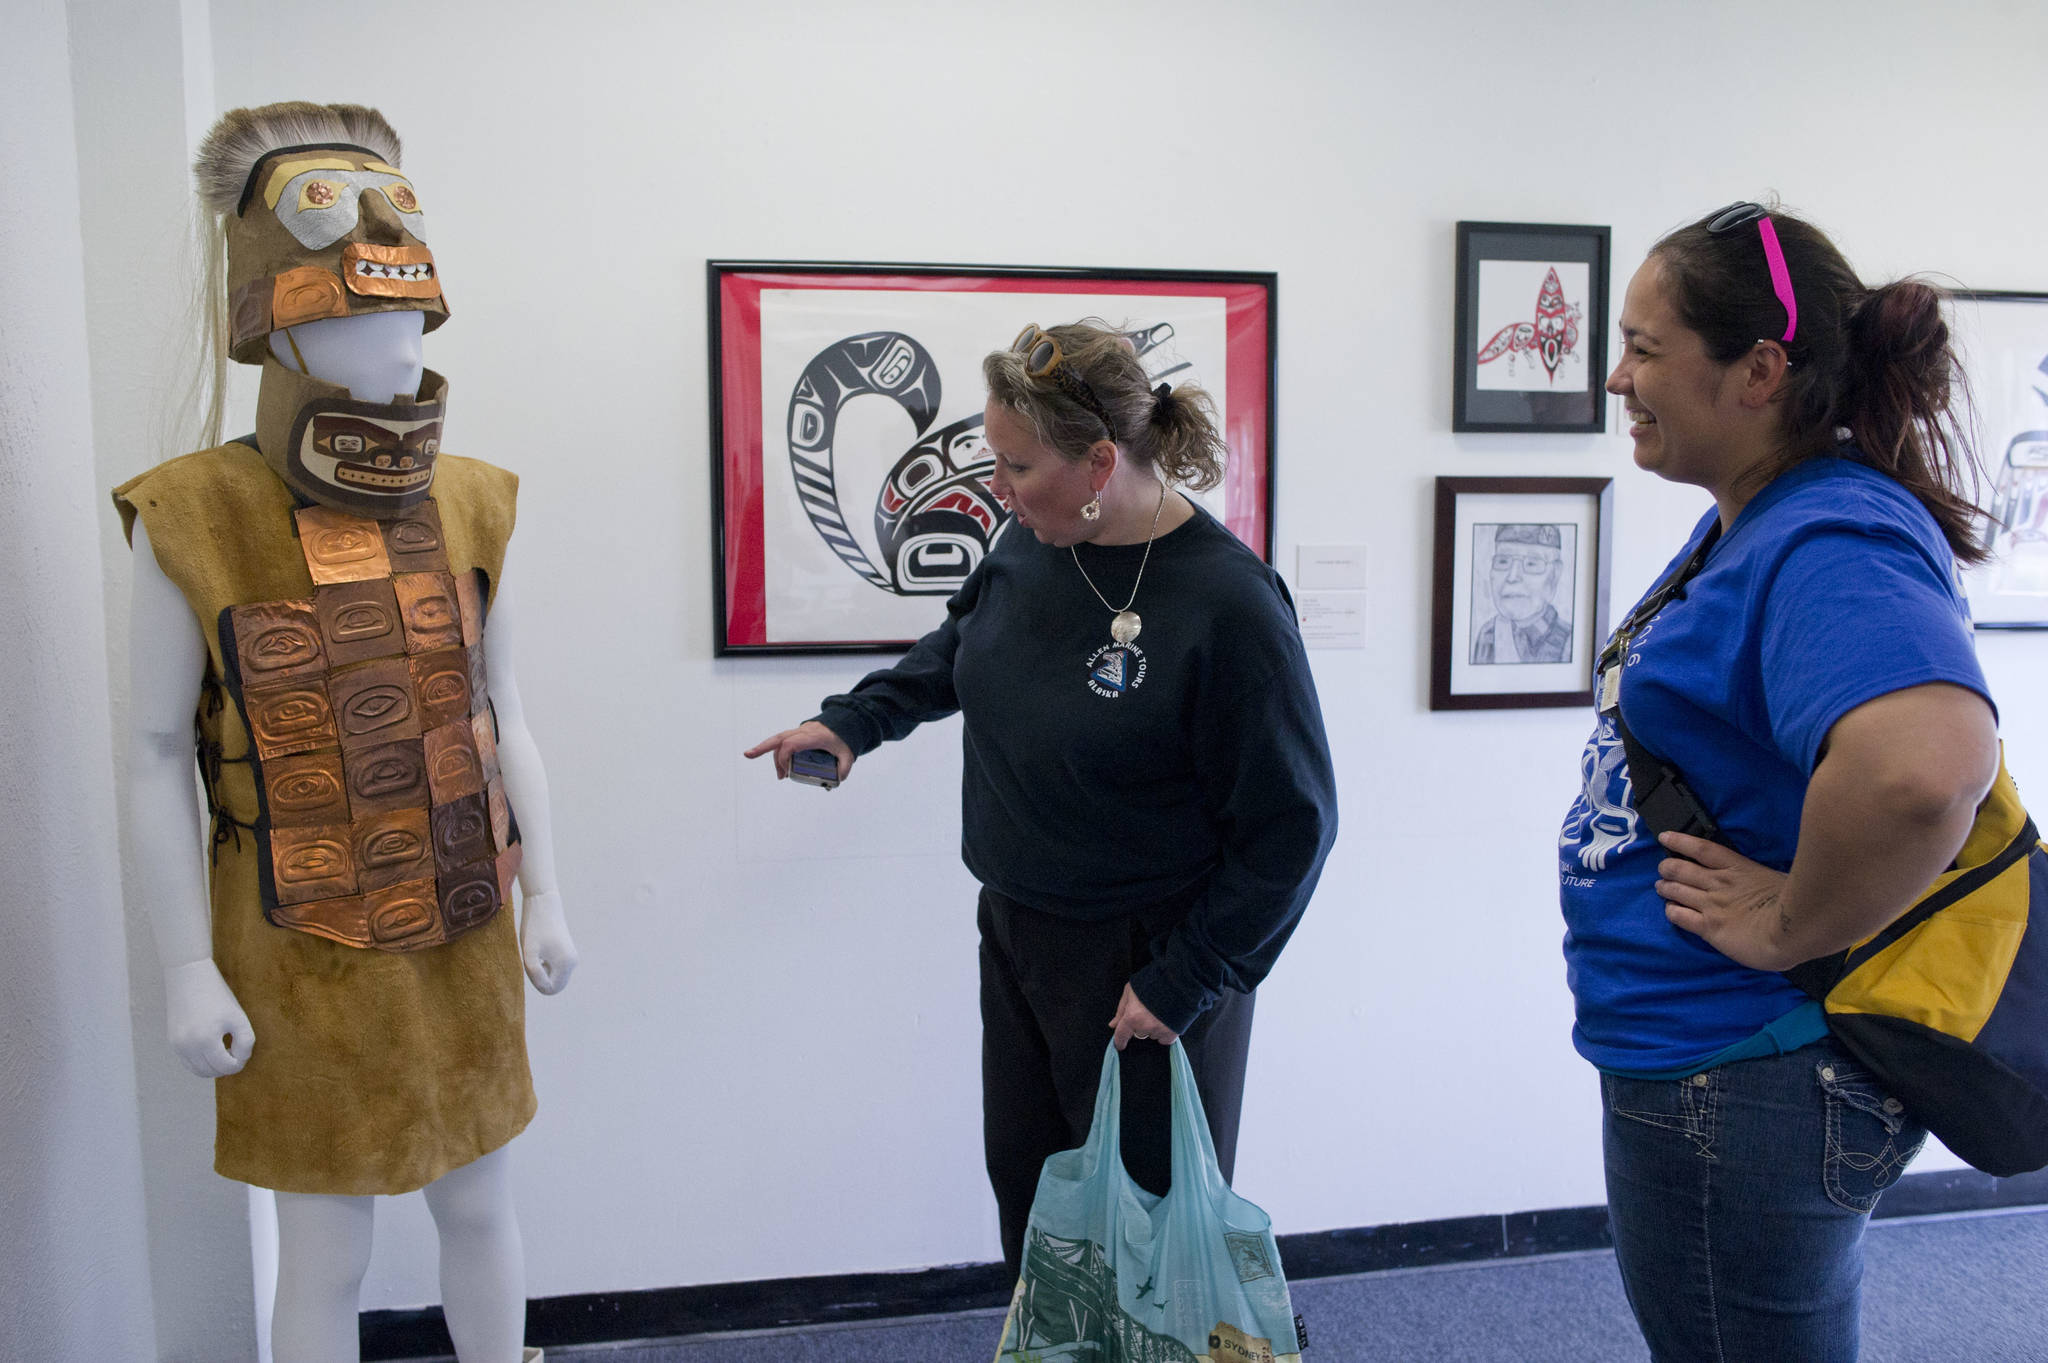 Divina Cole, right, and Kelly Coursey Gray admire the warrior’s helmet and armor made by 61 students at Dzantik’i Heeni Middle School that won Juried Youth Art Award at the Juneau Arts and Culture Center as part of Celebration 2016. The juried art show is accepting applications. (Michael Penn | Juneau Empire File)